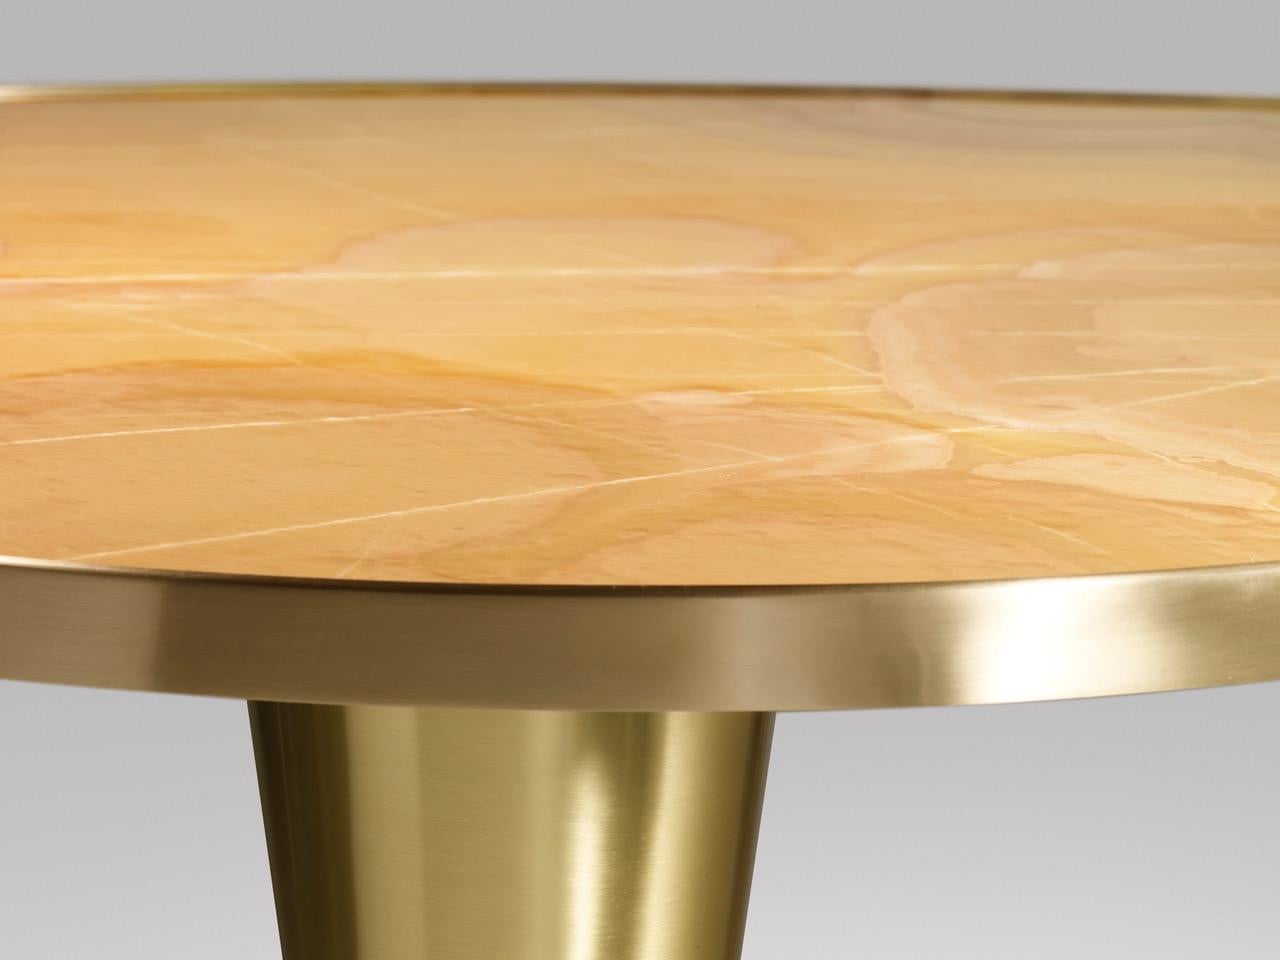 Cosulich interiors in collaboration with Atelier Terrai: Italian contemporary honey onyx and satin brass dining table from the Satellite collection, entirely handcrafted in Italy. The beauty of a warm onyx is the color of the stone with gold metal